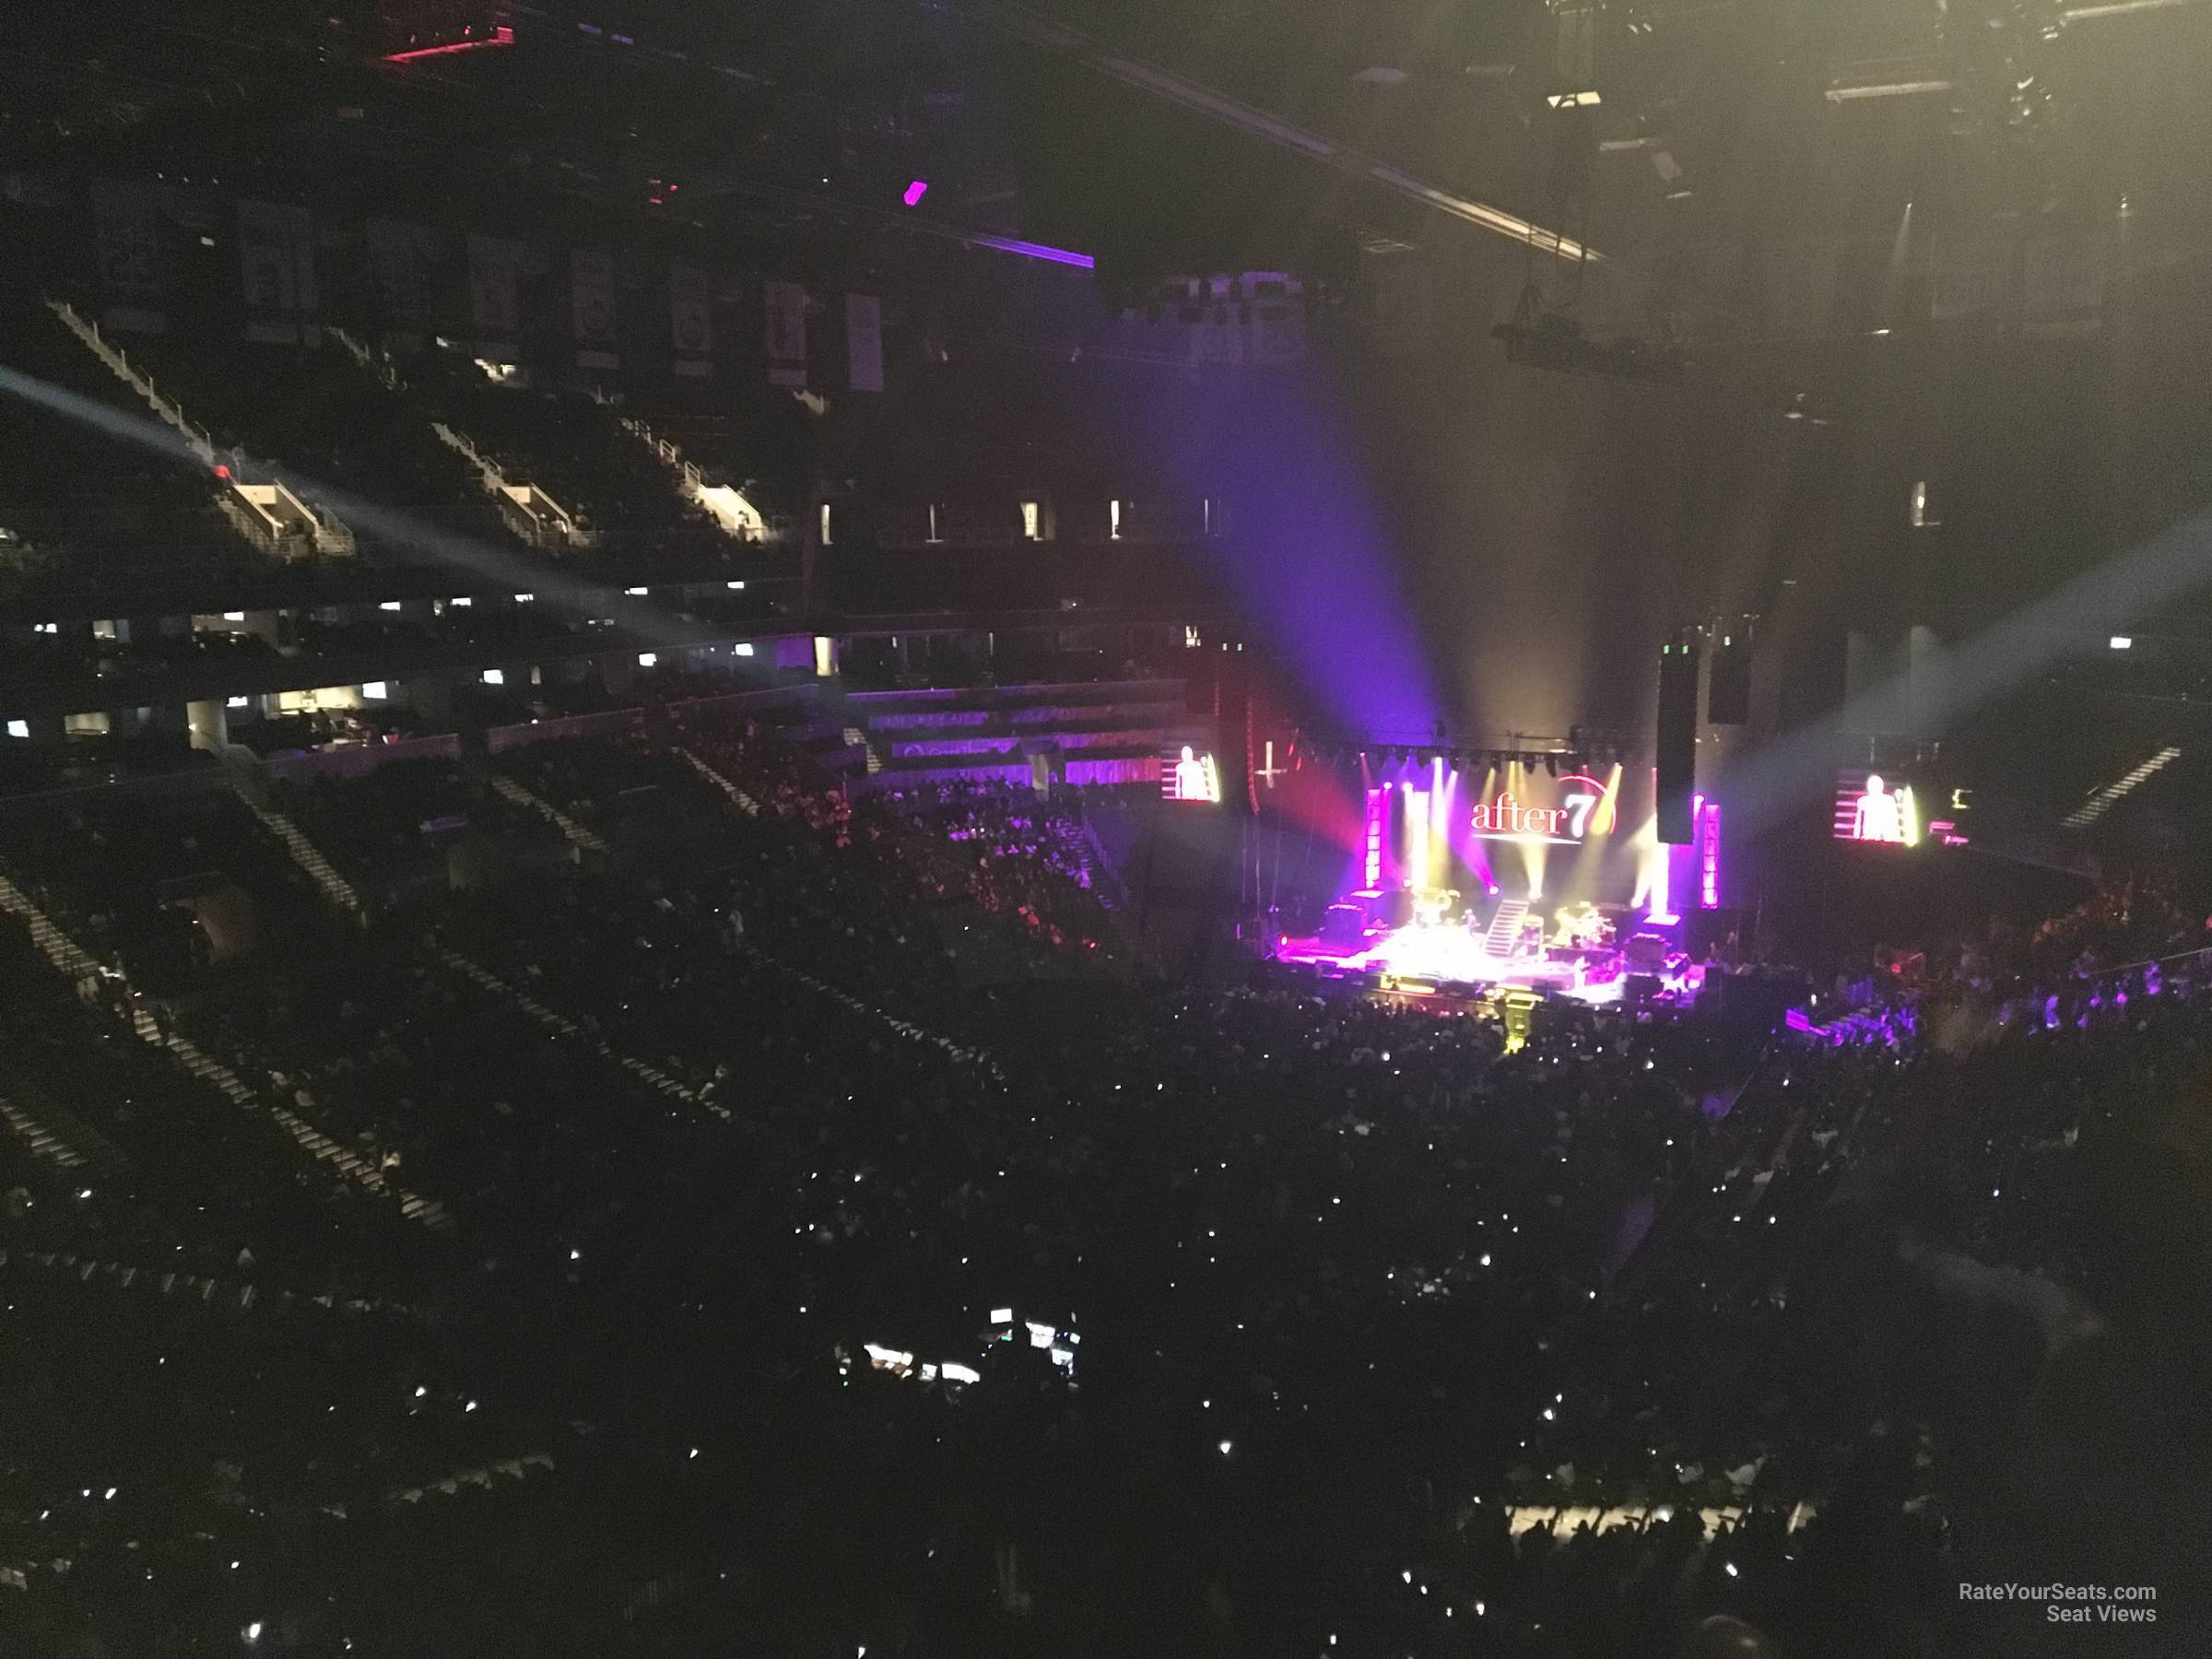 section 214, row 8 seat view  for concert - barclays center